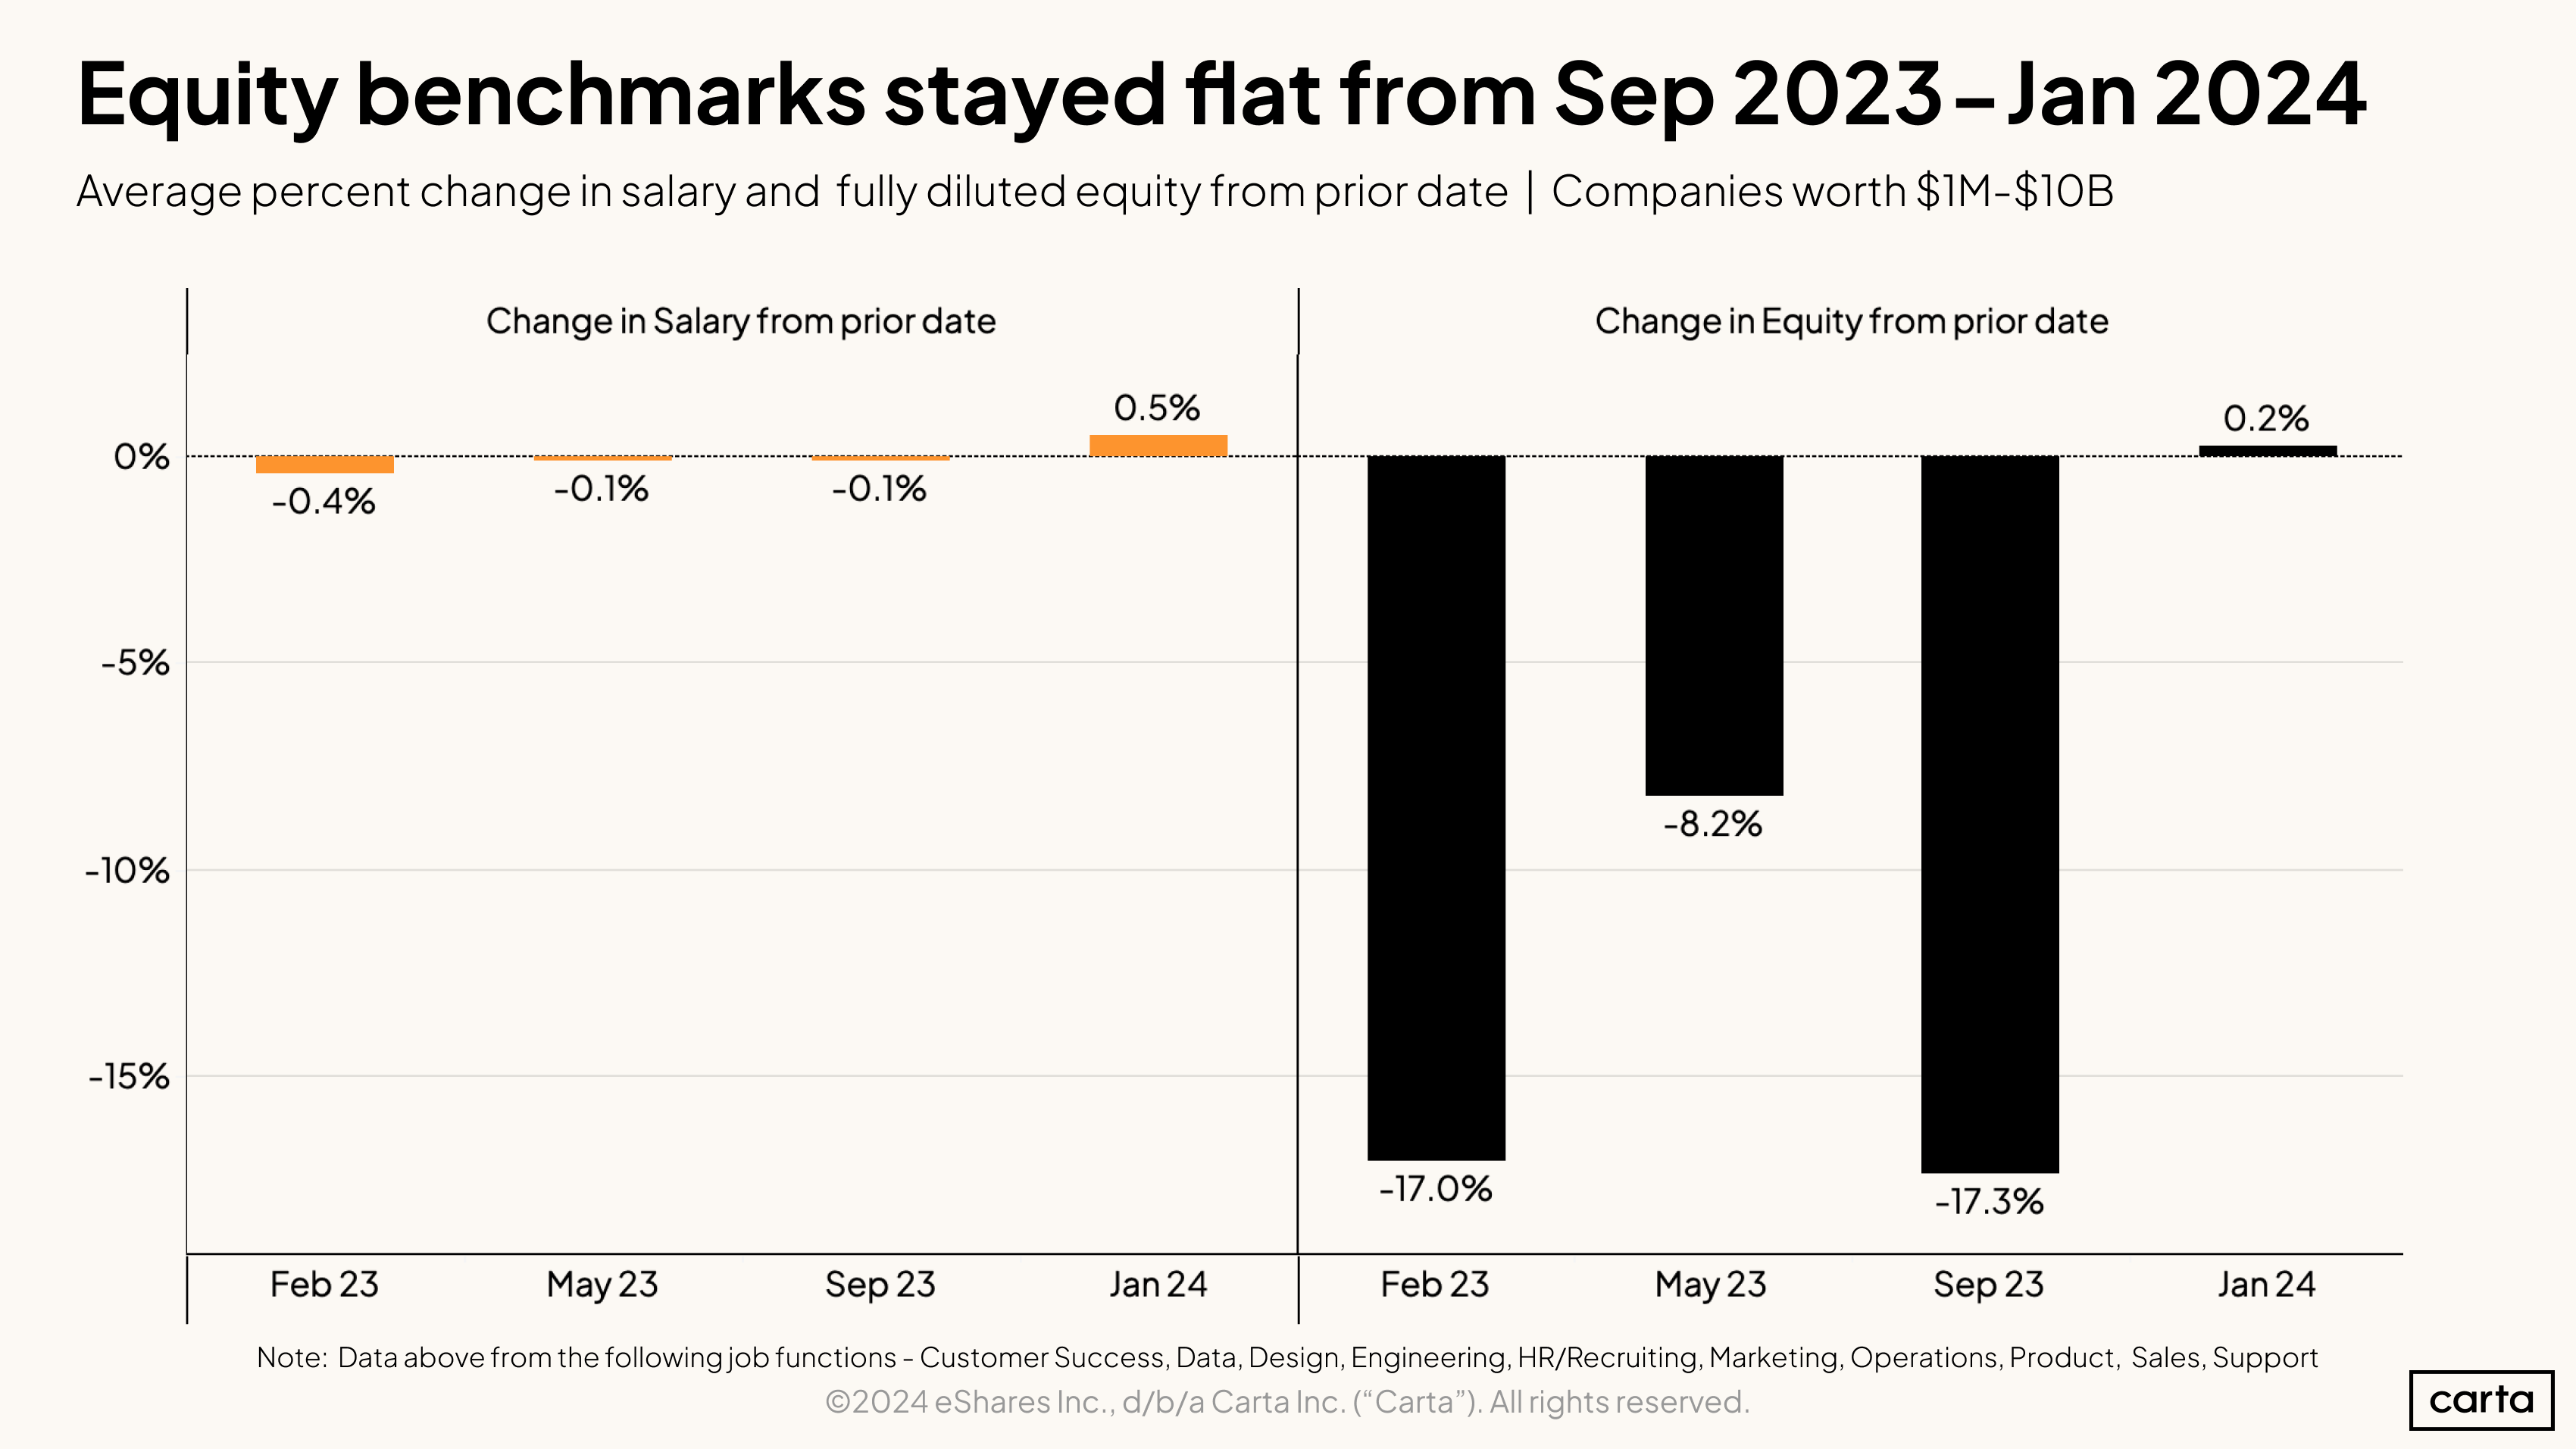 Equity benchmarks stayed flat from Sep 2023 - Jan 2024